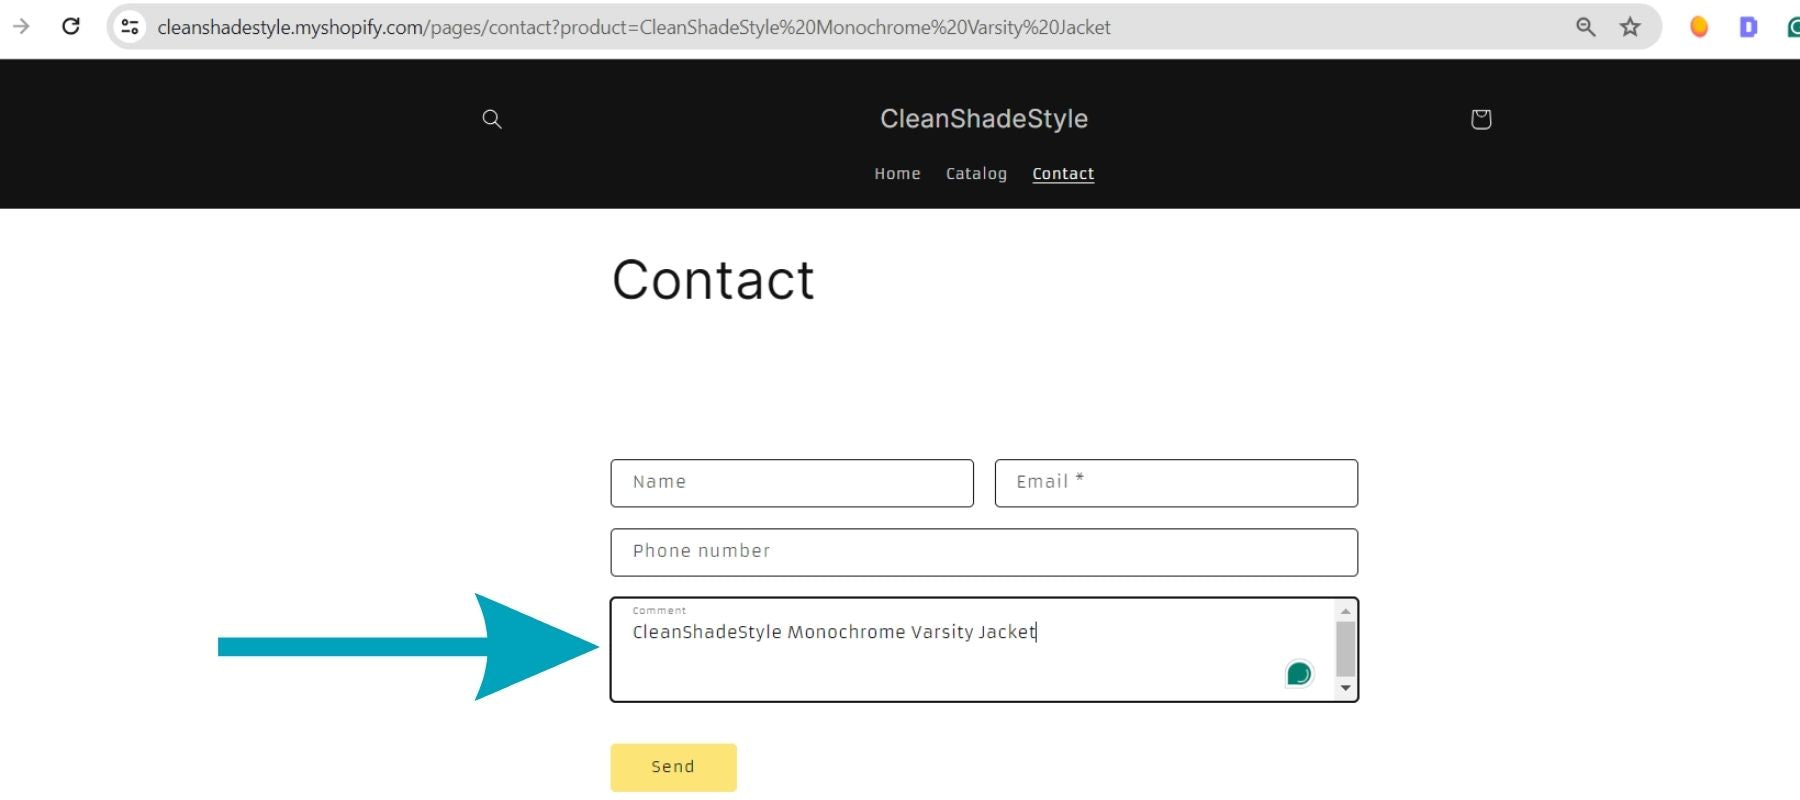 Automatically Inserting Product Names To Contact Form (Optional)